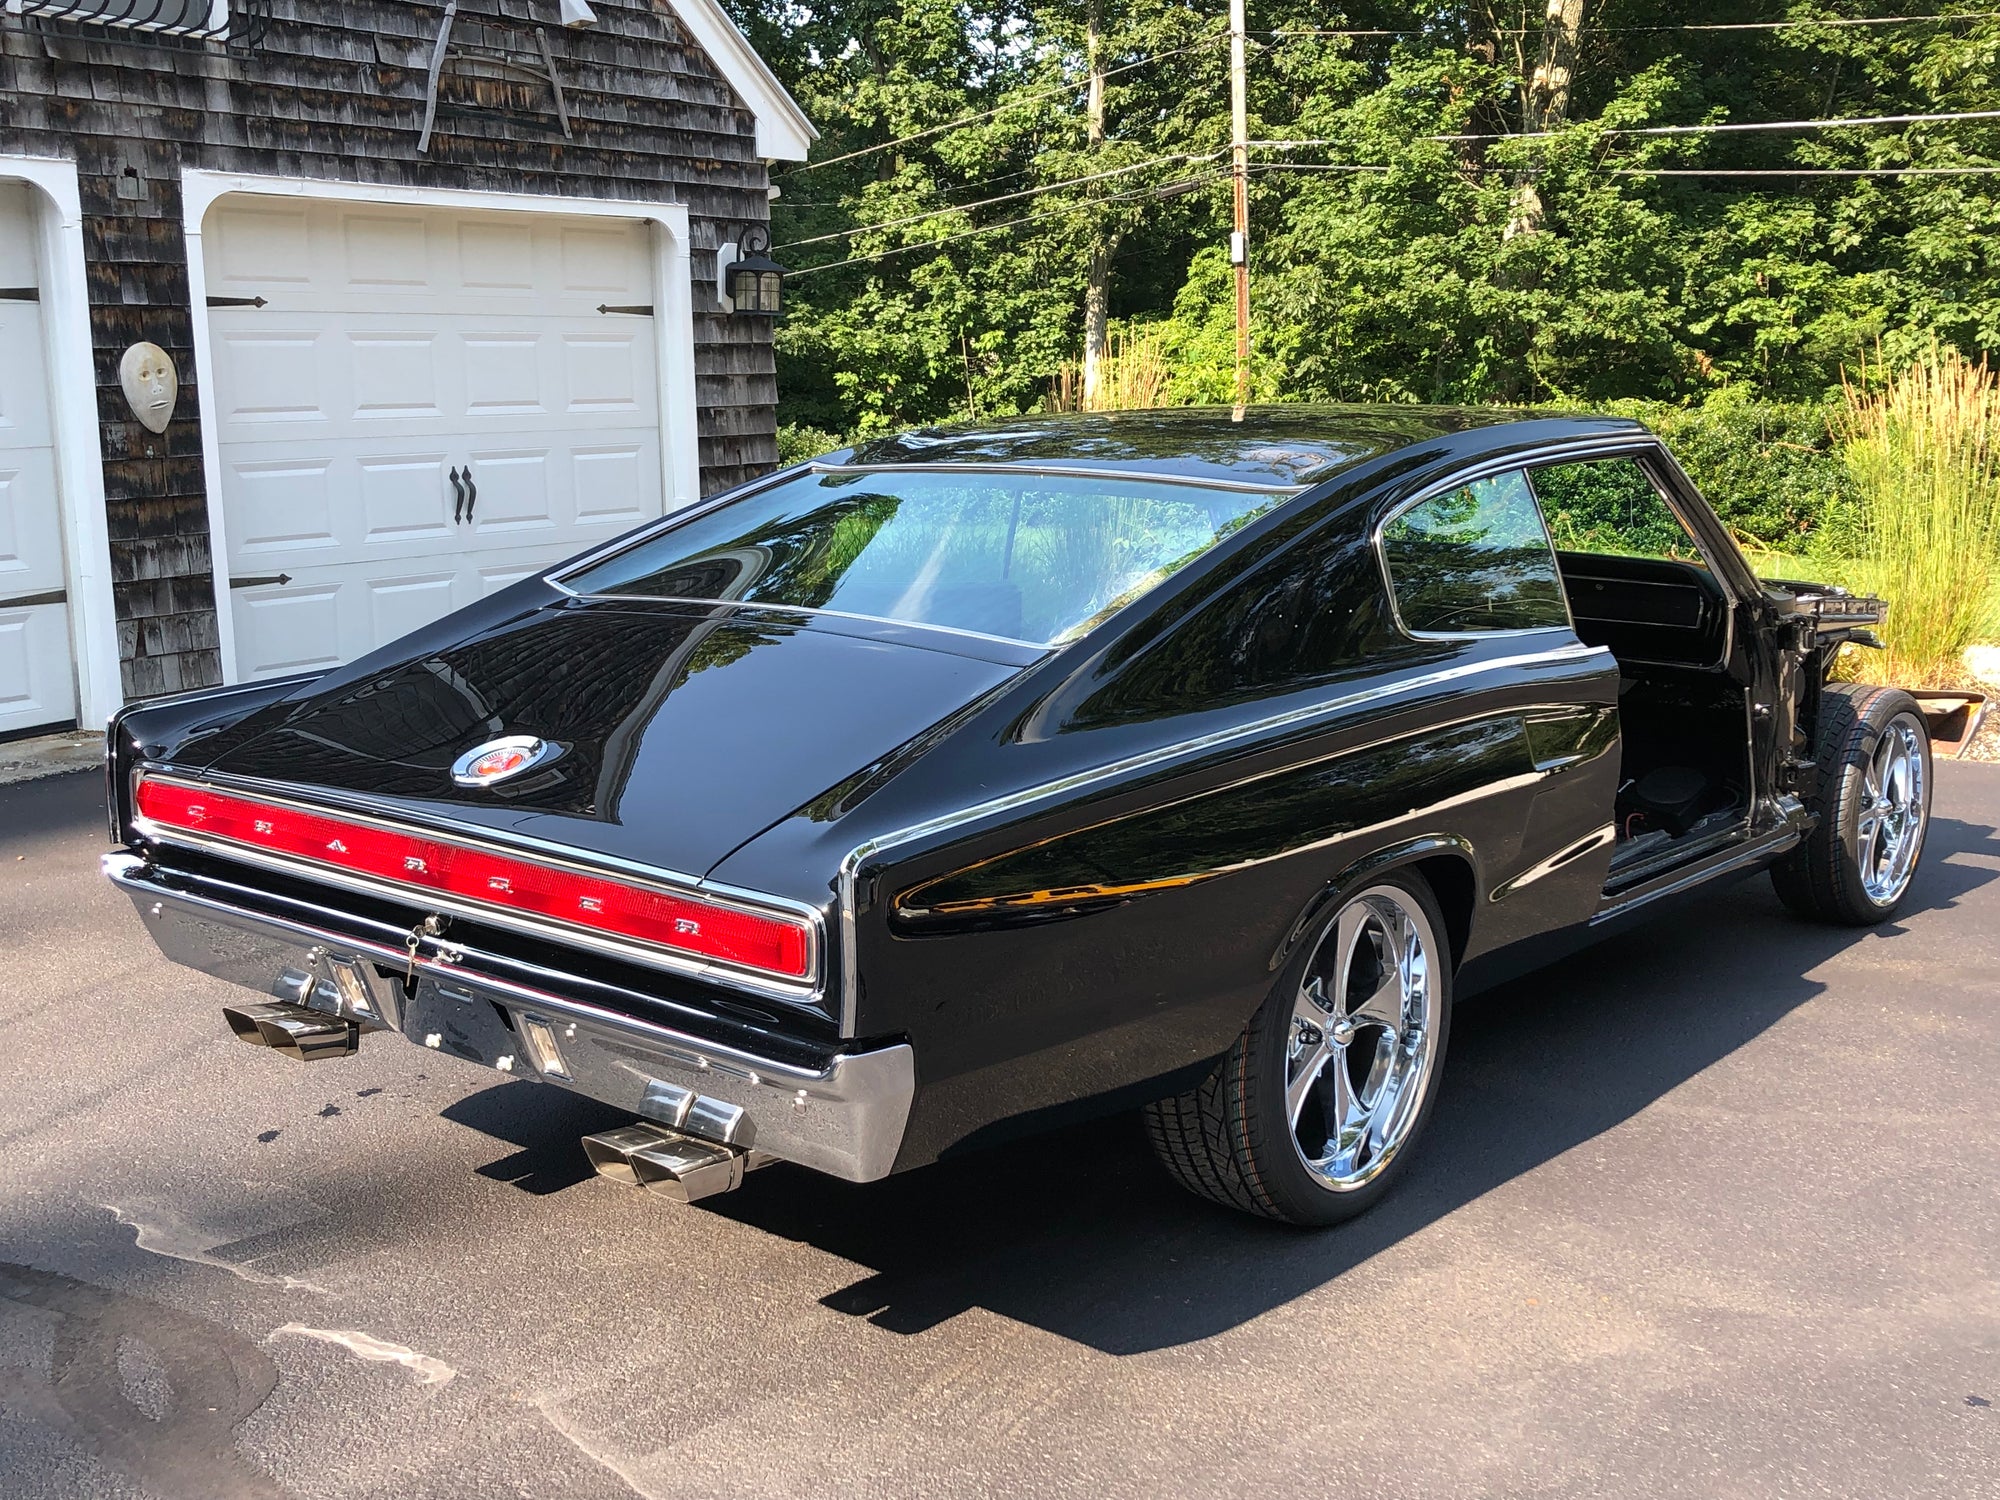 67 Charger Project Update Backside is Lookin Ooh So Good!